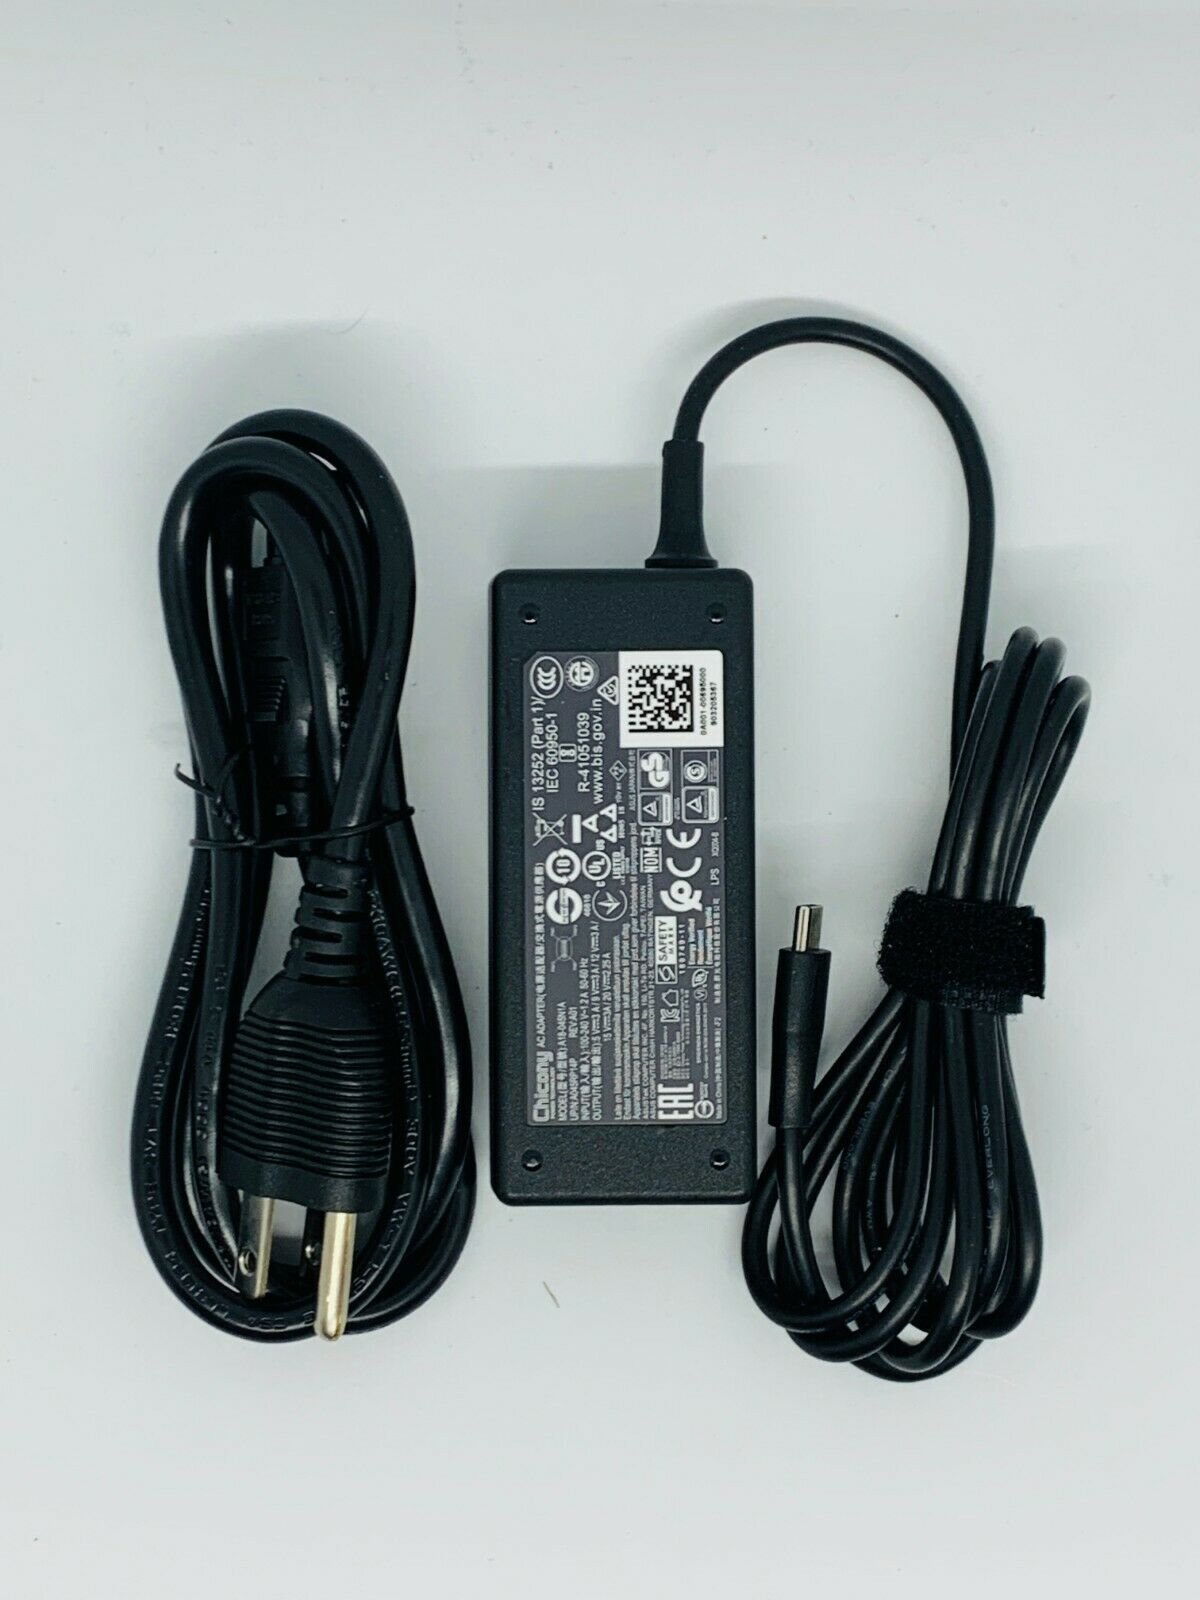 Chicony A18-045N1A 45W Type-C AC Power Adapter Charger for Acer Asus HP Lenovo